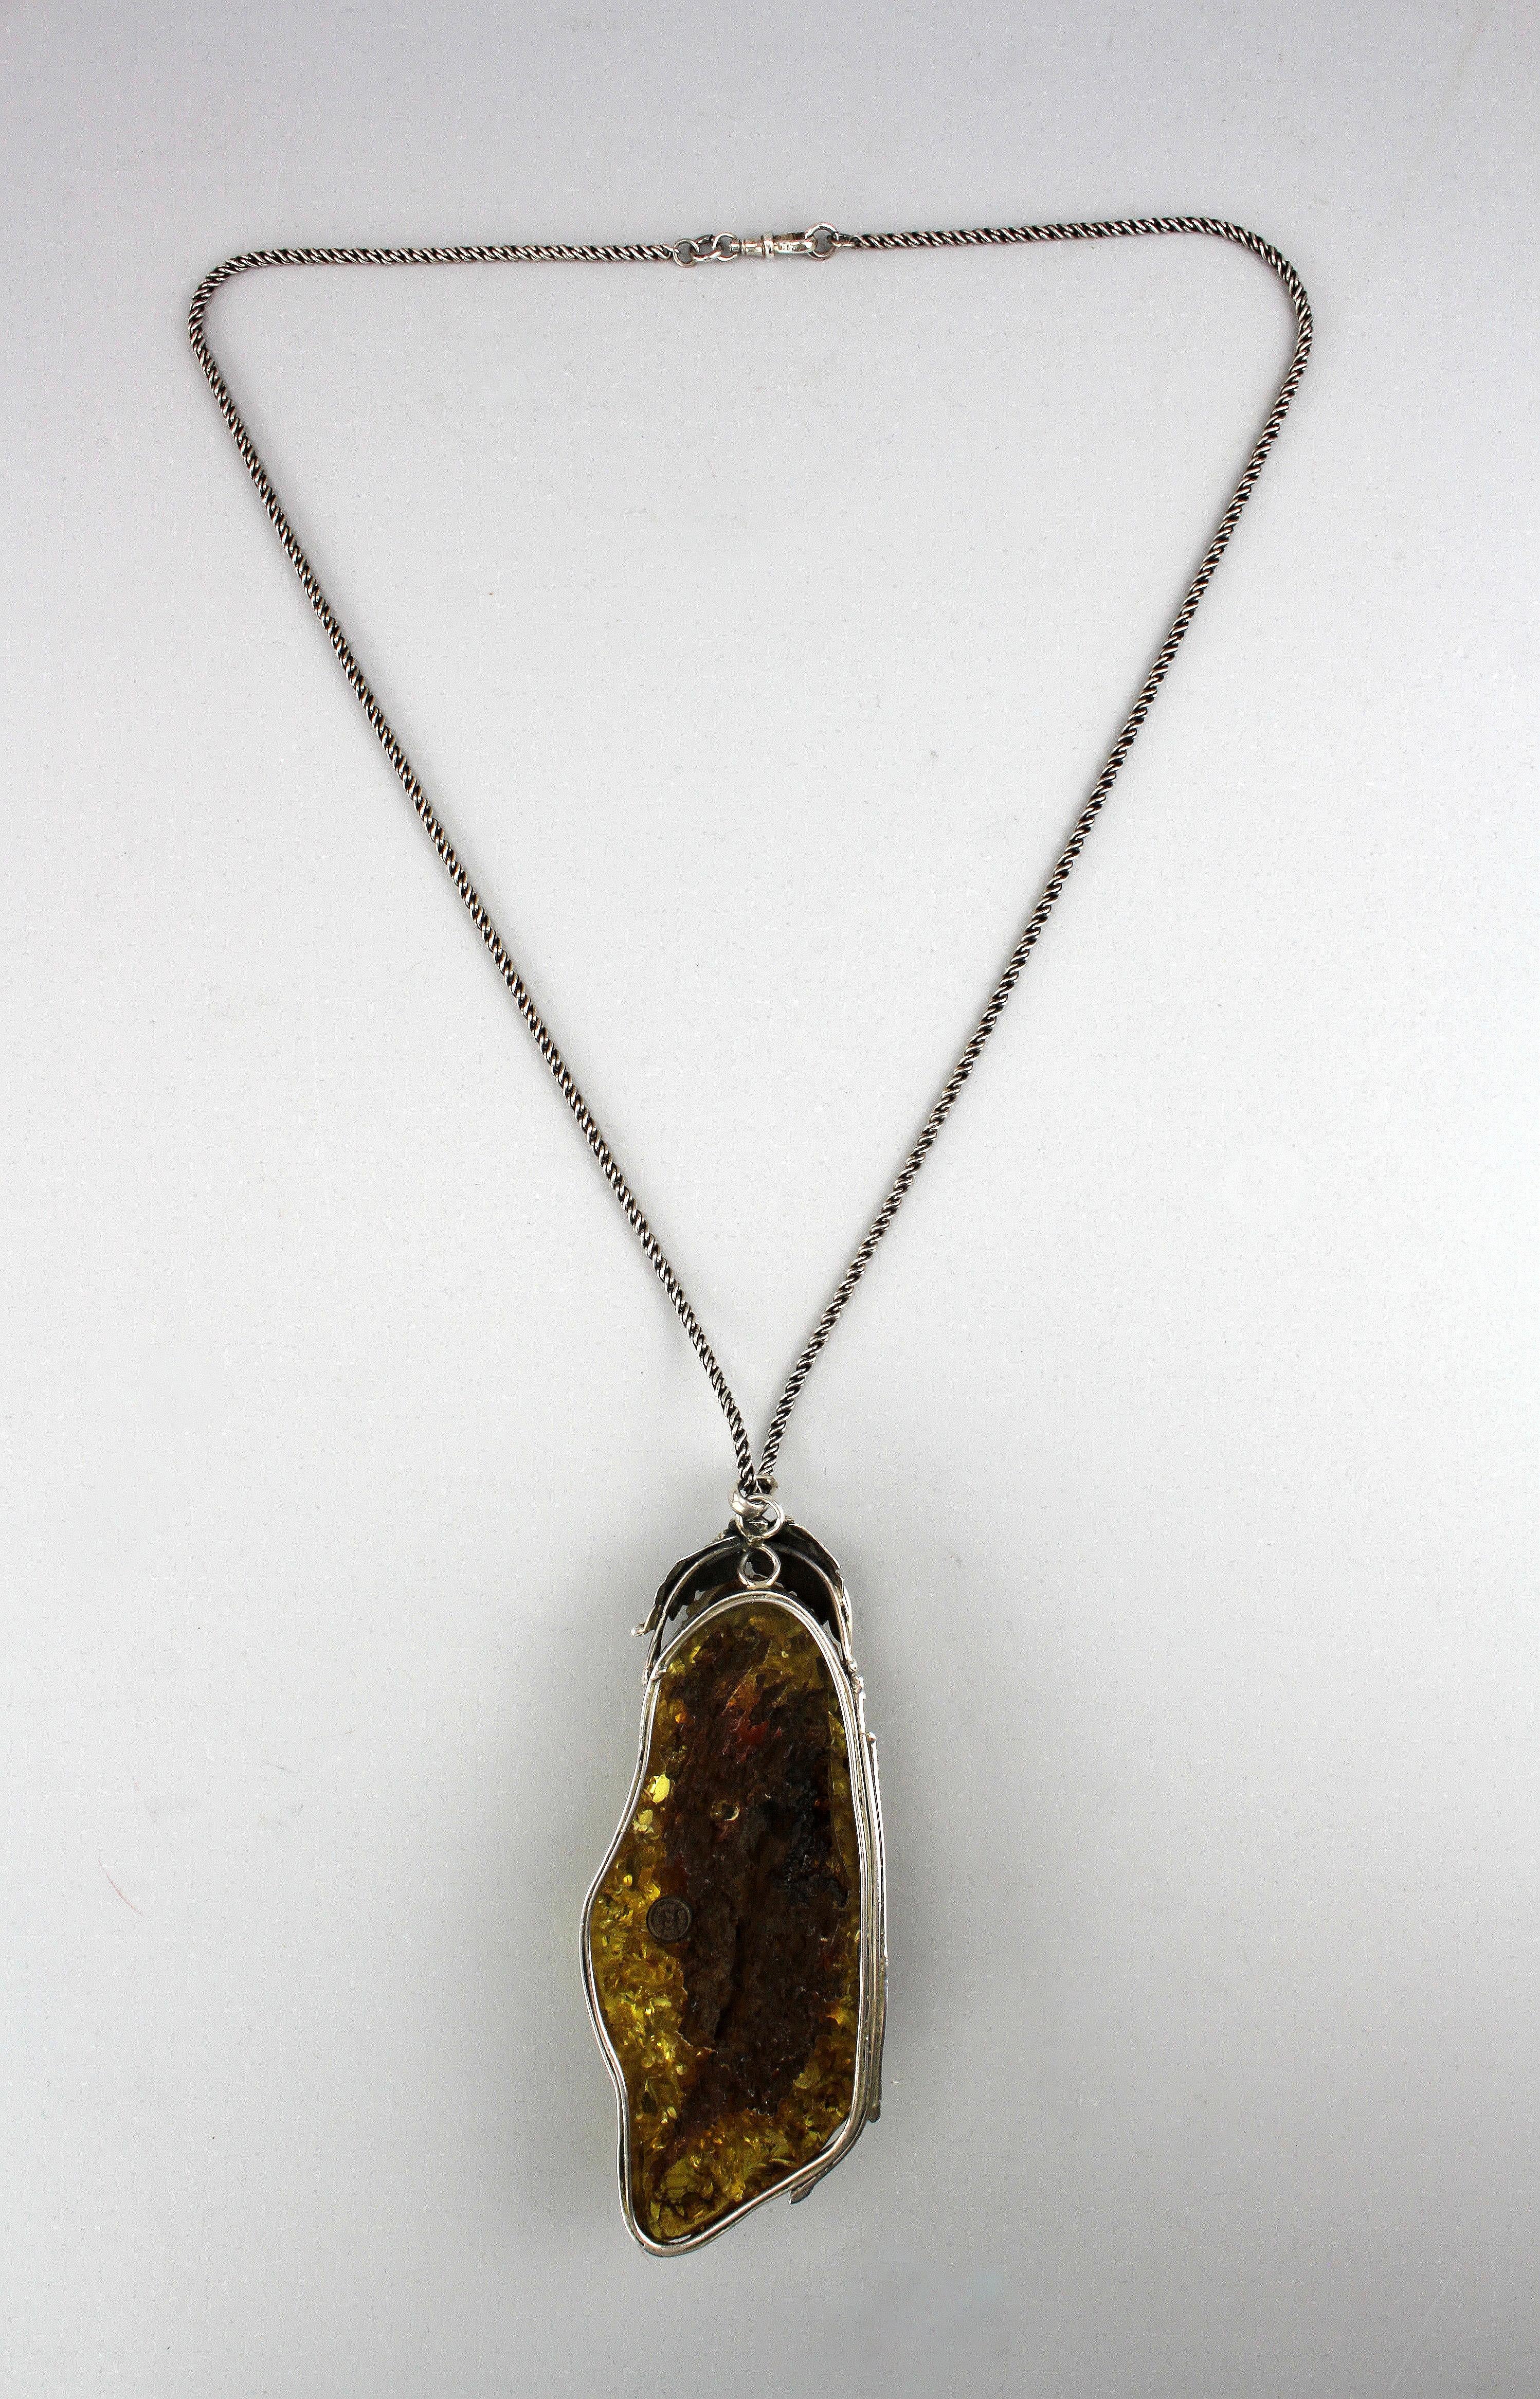 Antique Sterling Silver and Amber Carving Pendant Necklace, St. Petersburg, 1892 In Good Condition For Sale In Braintree, GB